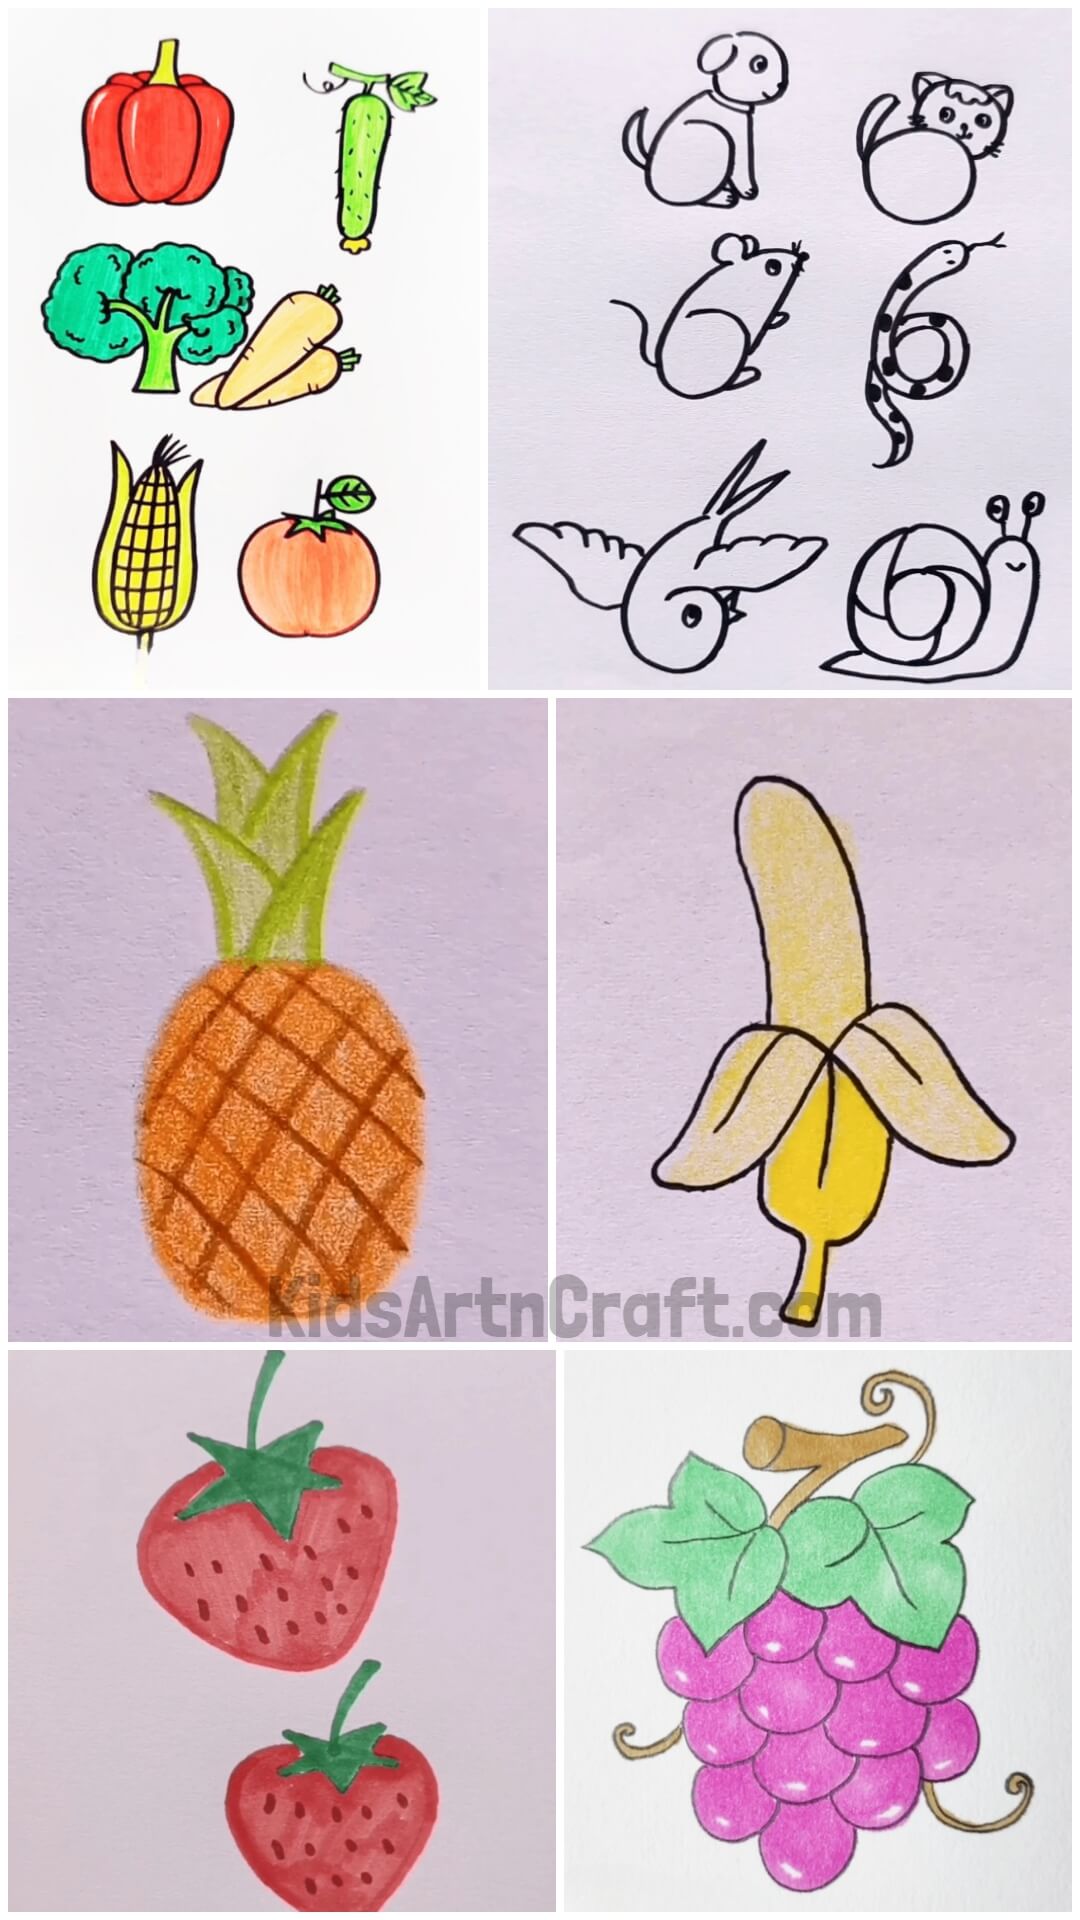 Simple Drawings for Kids - Fruits, Vegetables & Animals